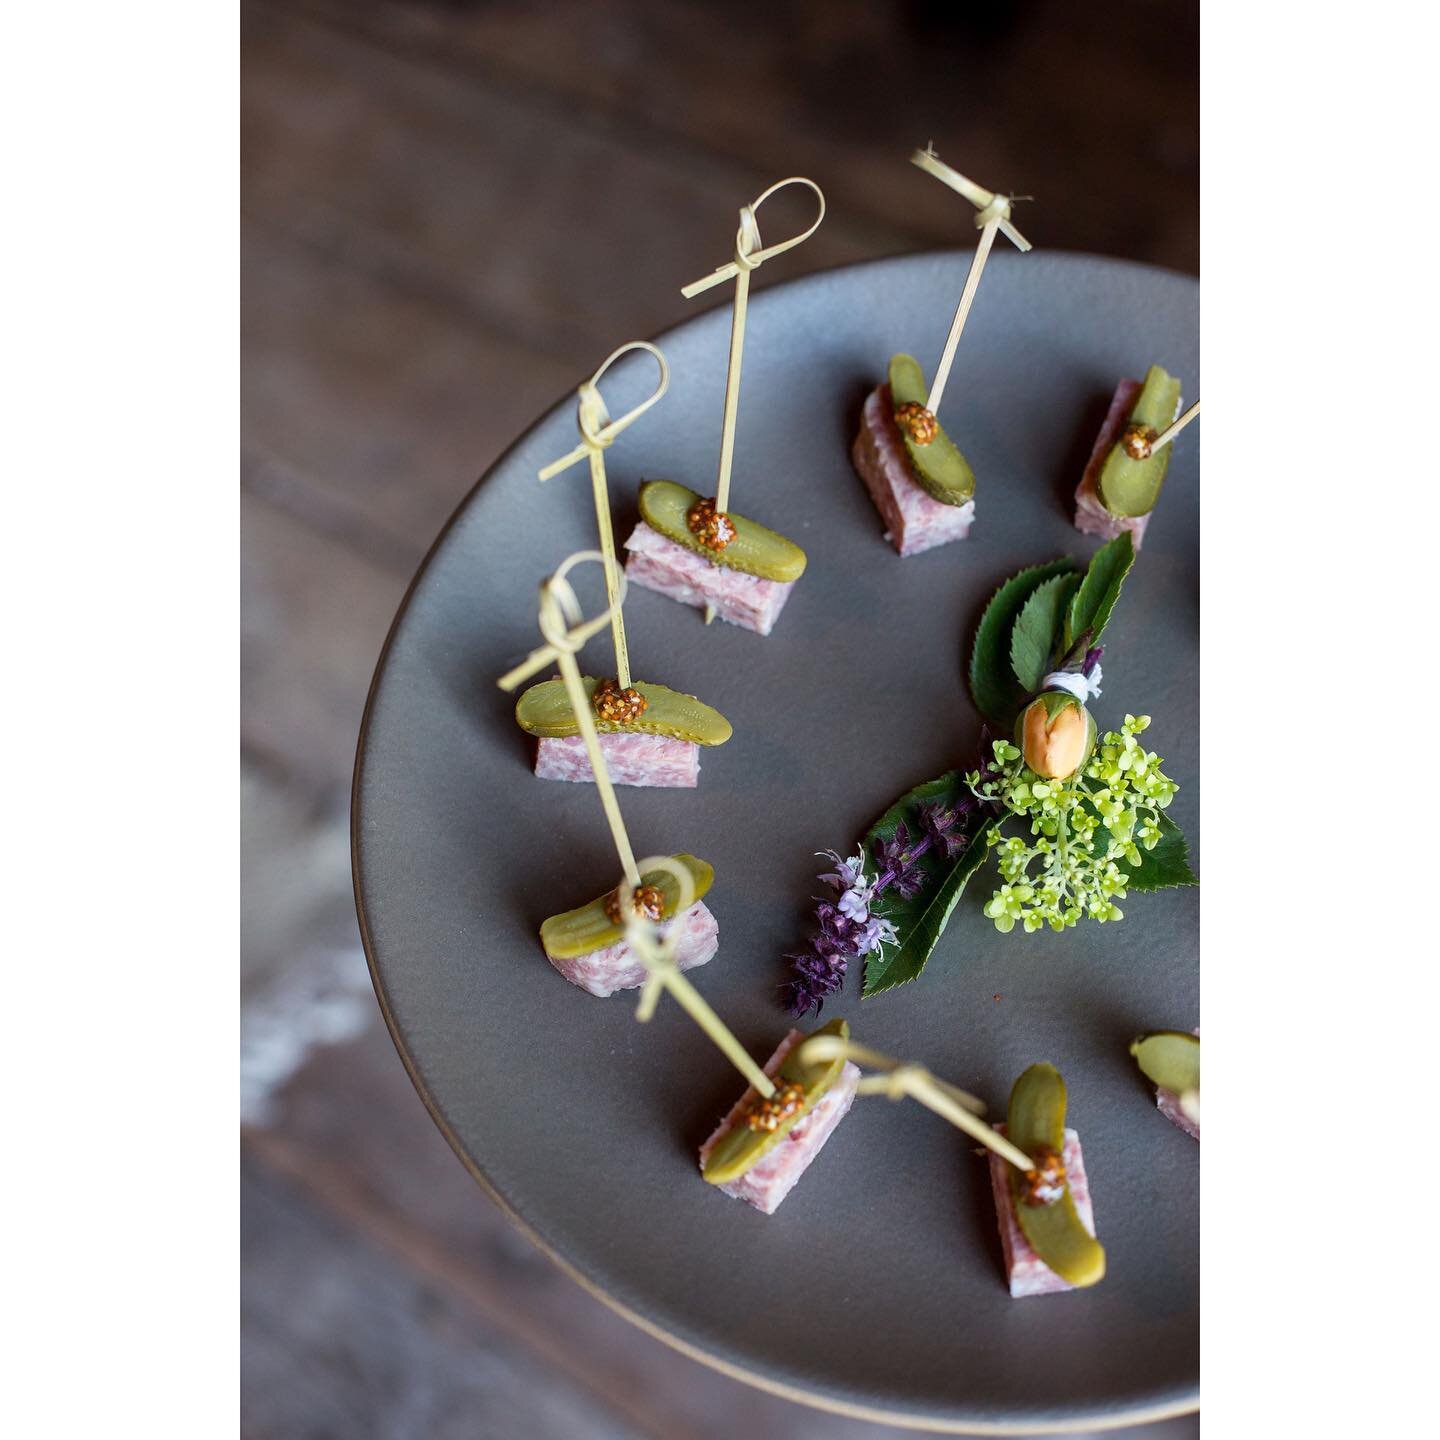 House made pork terrine skewer with cornichon and whole grain mustard